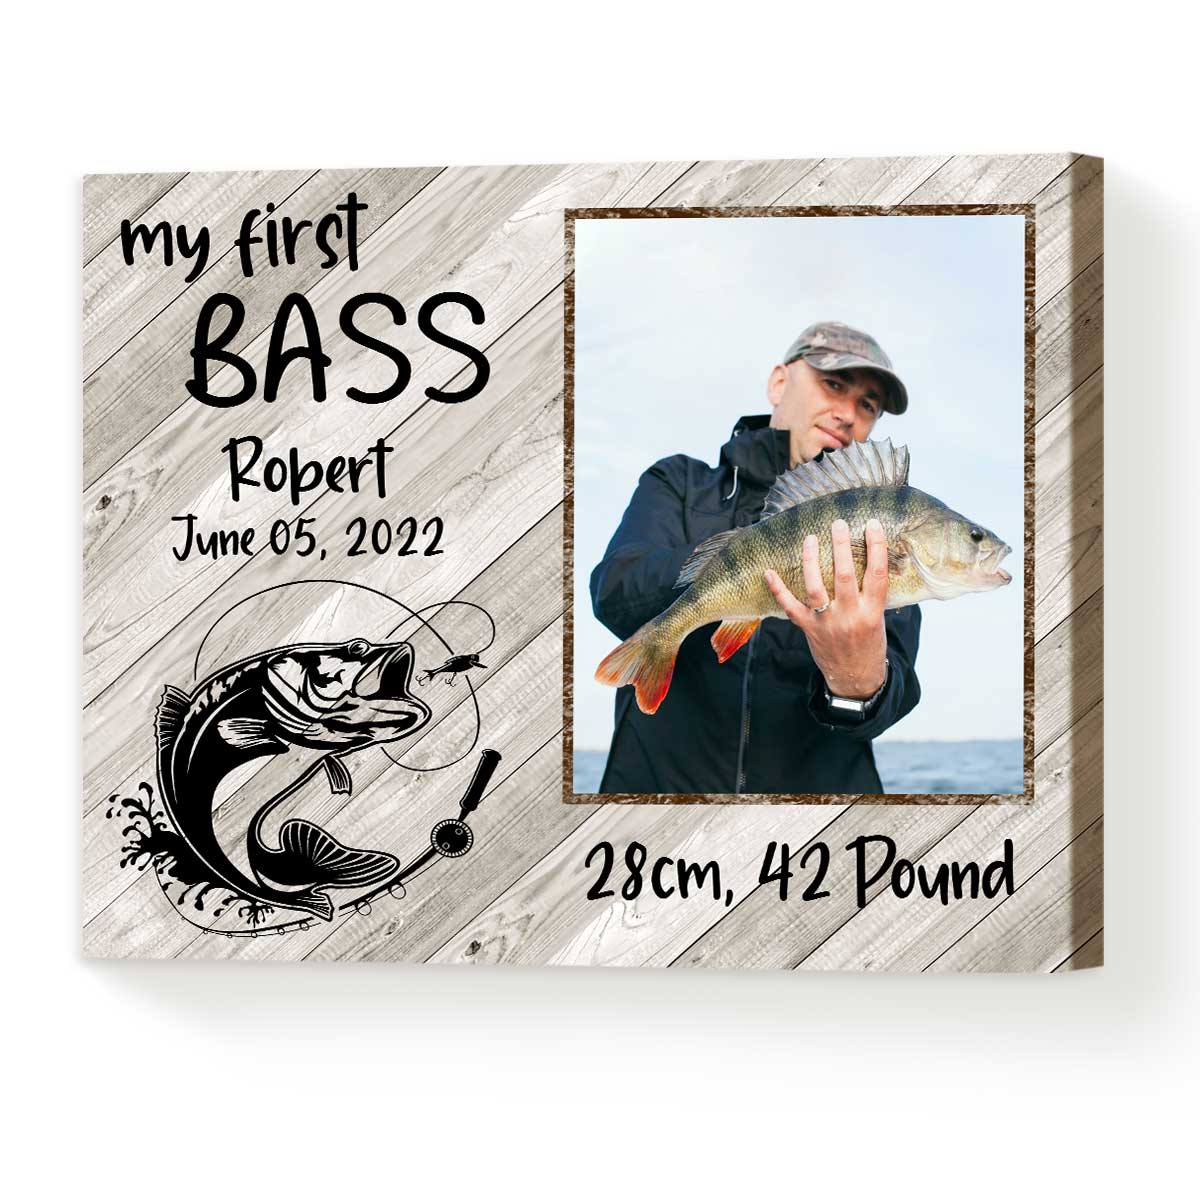 My Fishing Adventure Children's Personalized Book - A Unique Gift